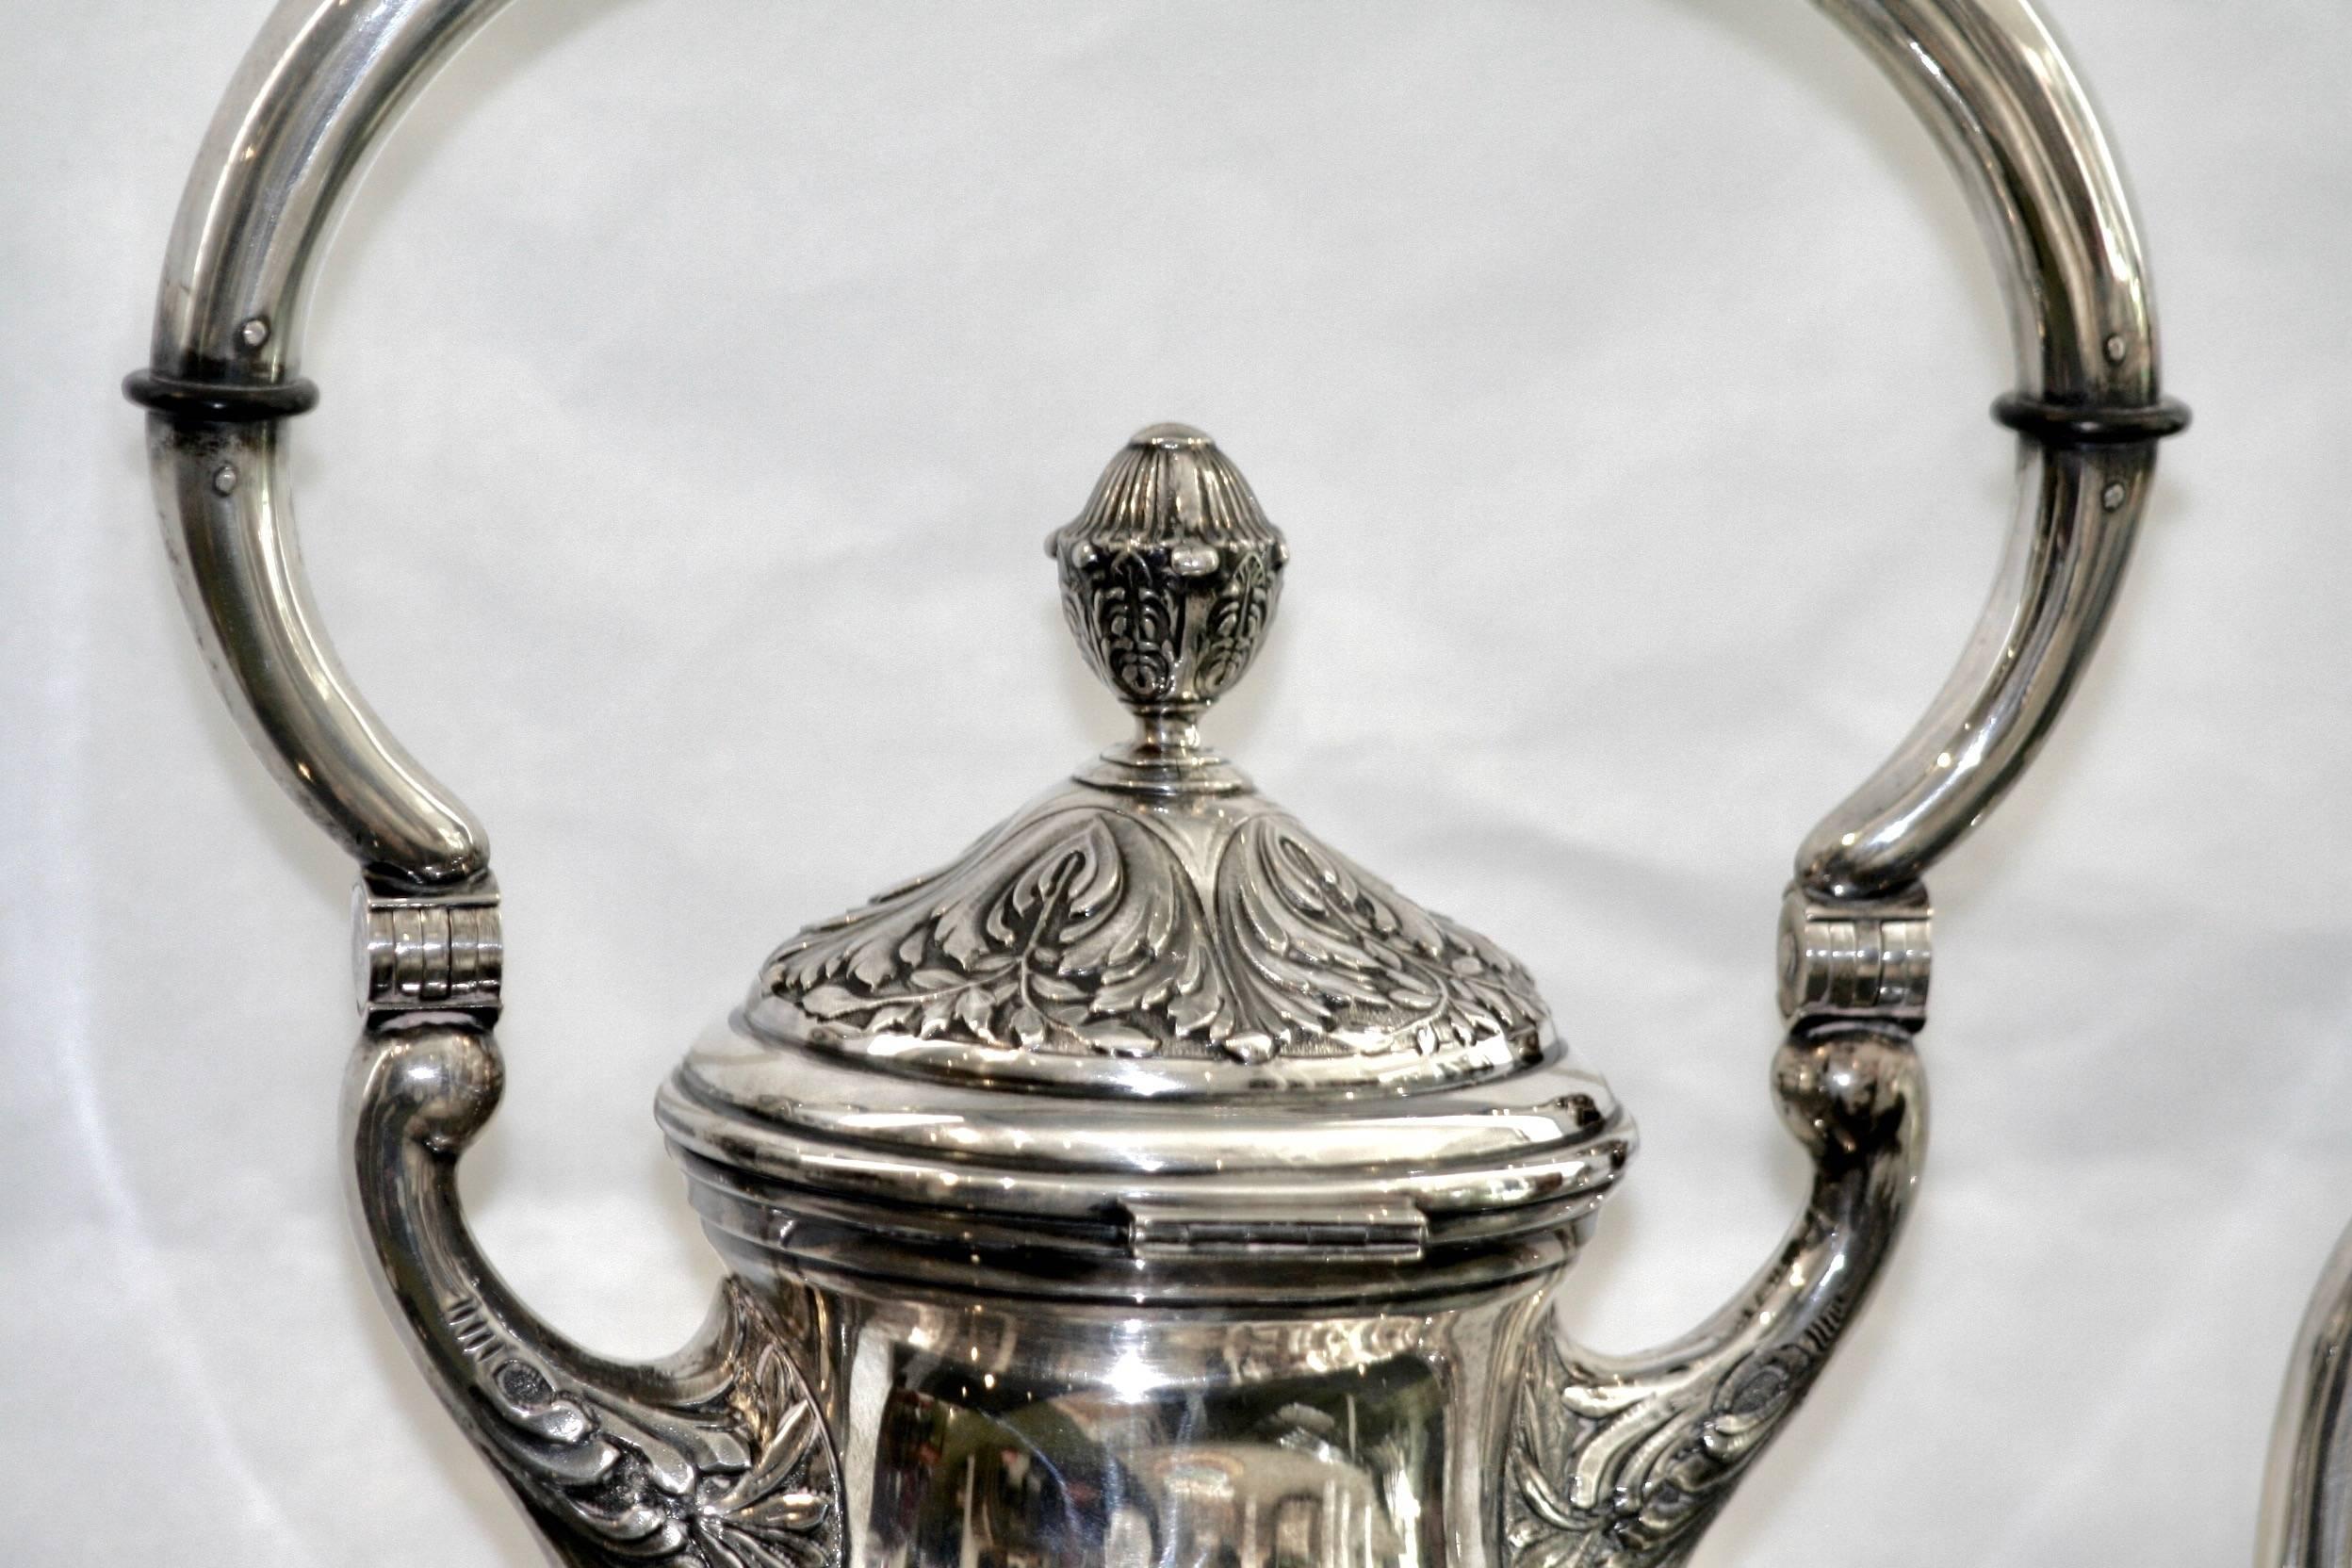 19th century English silver samovar. Large teapot with lid. Formed by three parts (teapot 32 cm. without lid, 37 with lid), strutting’s and with chafing-dish.